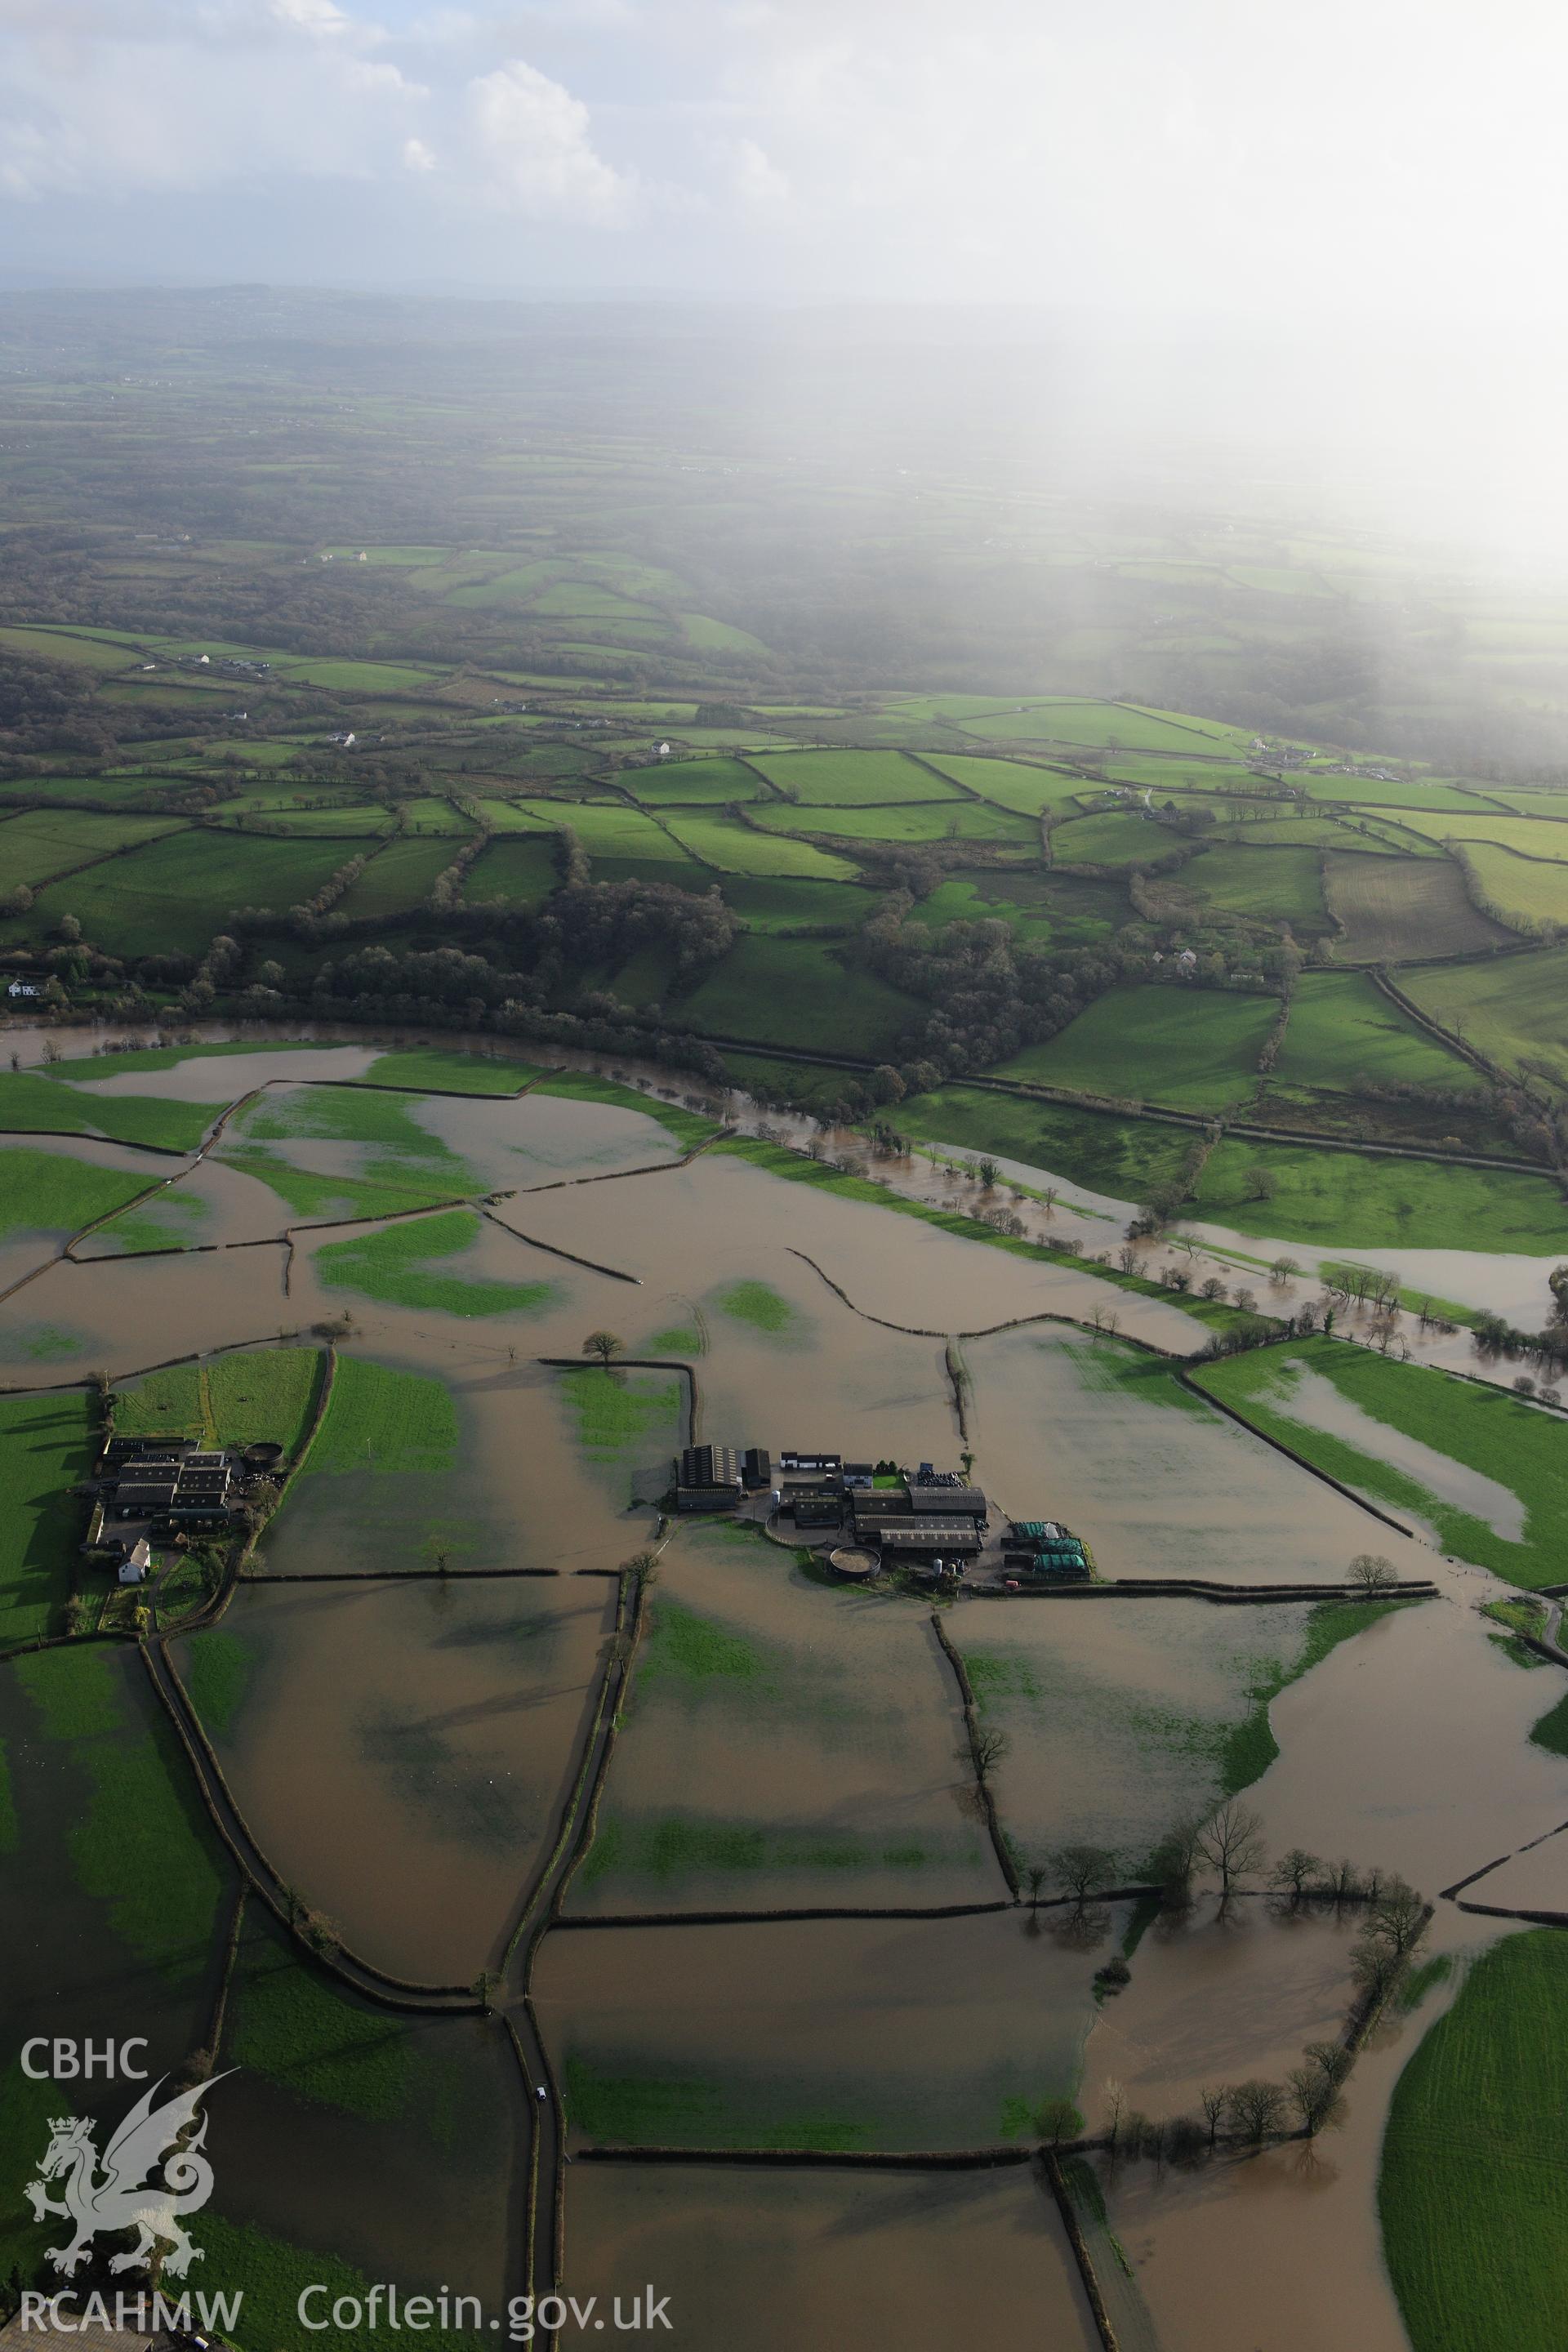 RCAHMW colour oblique photograph of Glantowy Fawr farm, with flooding, view from north-west. Taken by Toby Driver on 23/11/2012.